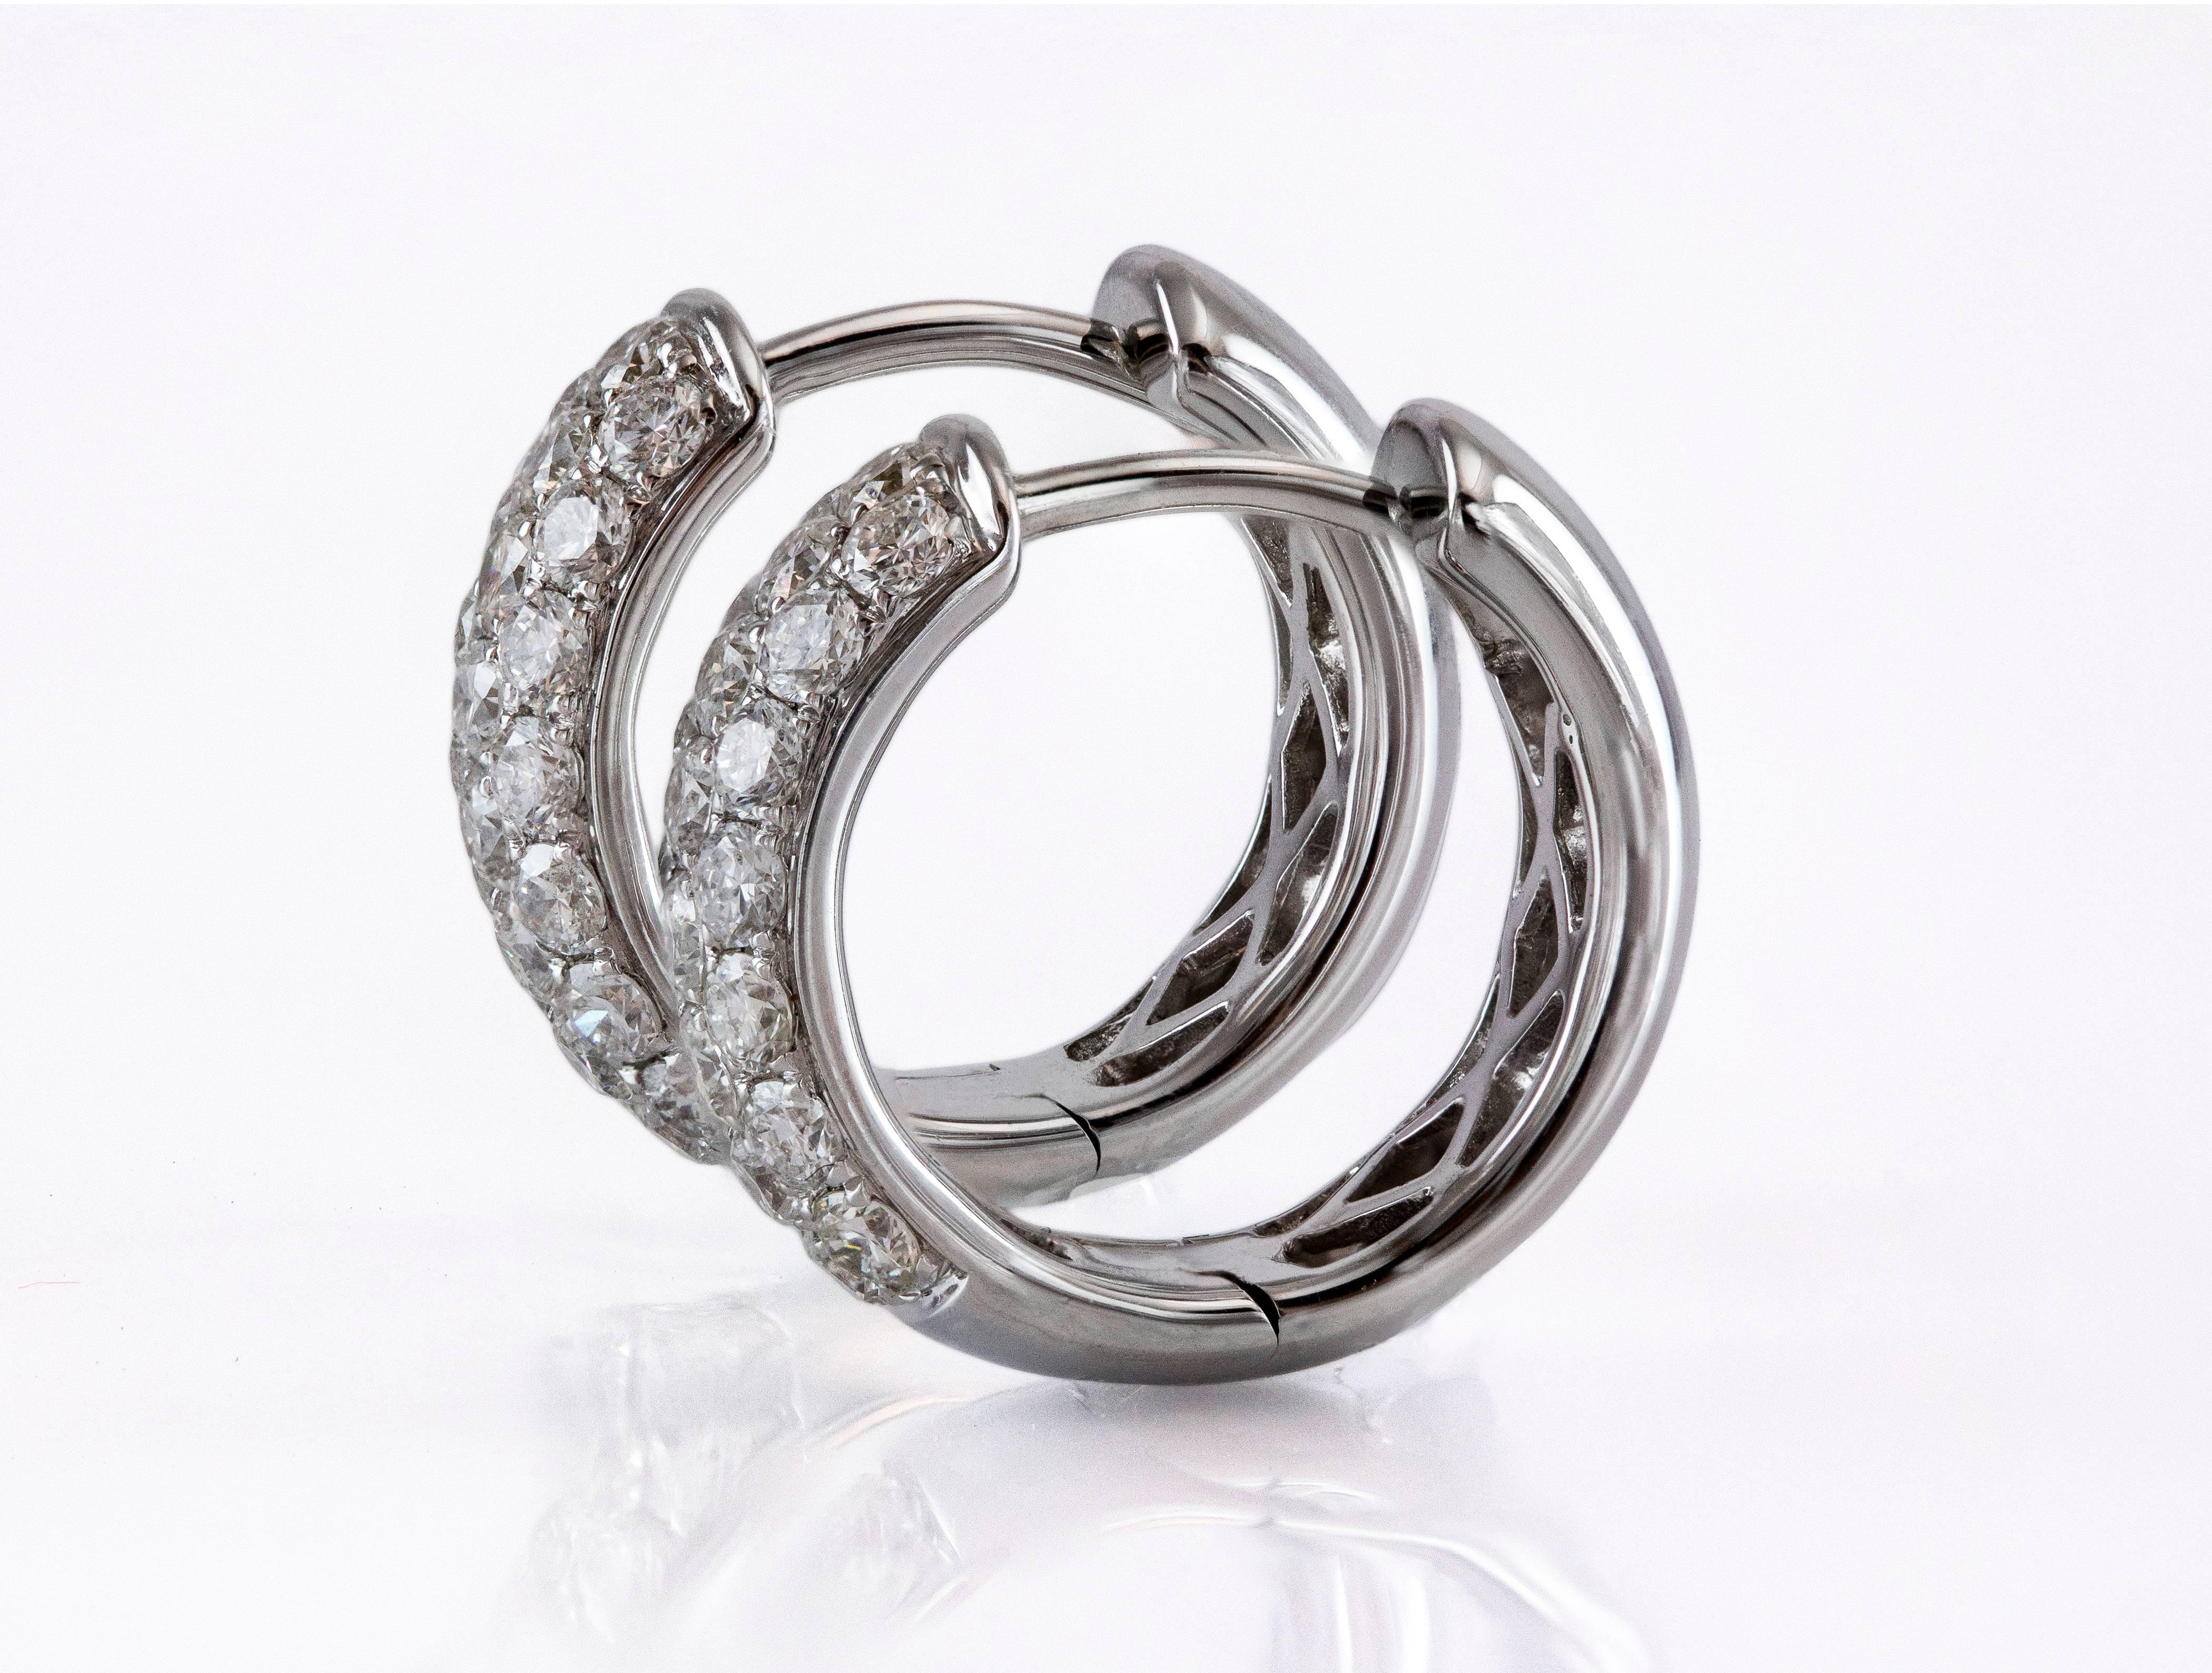 Beautiful huggie hoop earrings made with 18k white gold and set with 44 round brilliant diamonds weighing 0.95 carat total. The diamonds are F-G color and VS-SI1 clarity. These earrings made in 18K white gold. The diameter is 0.5in.